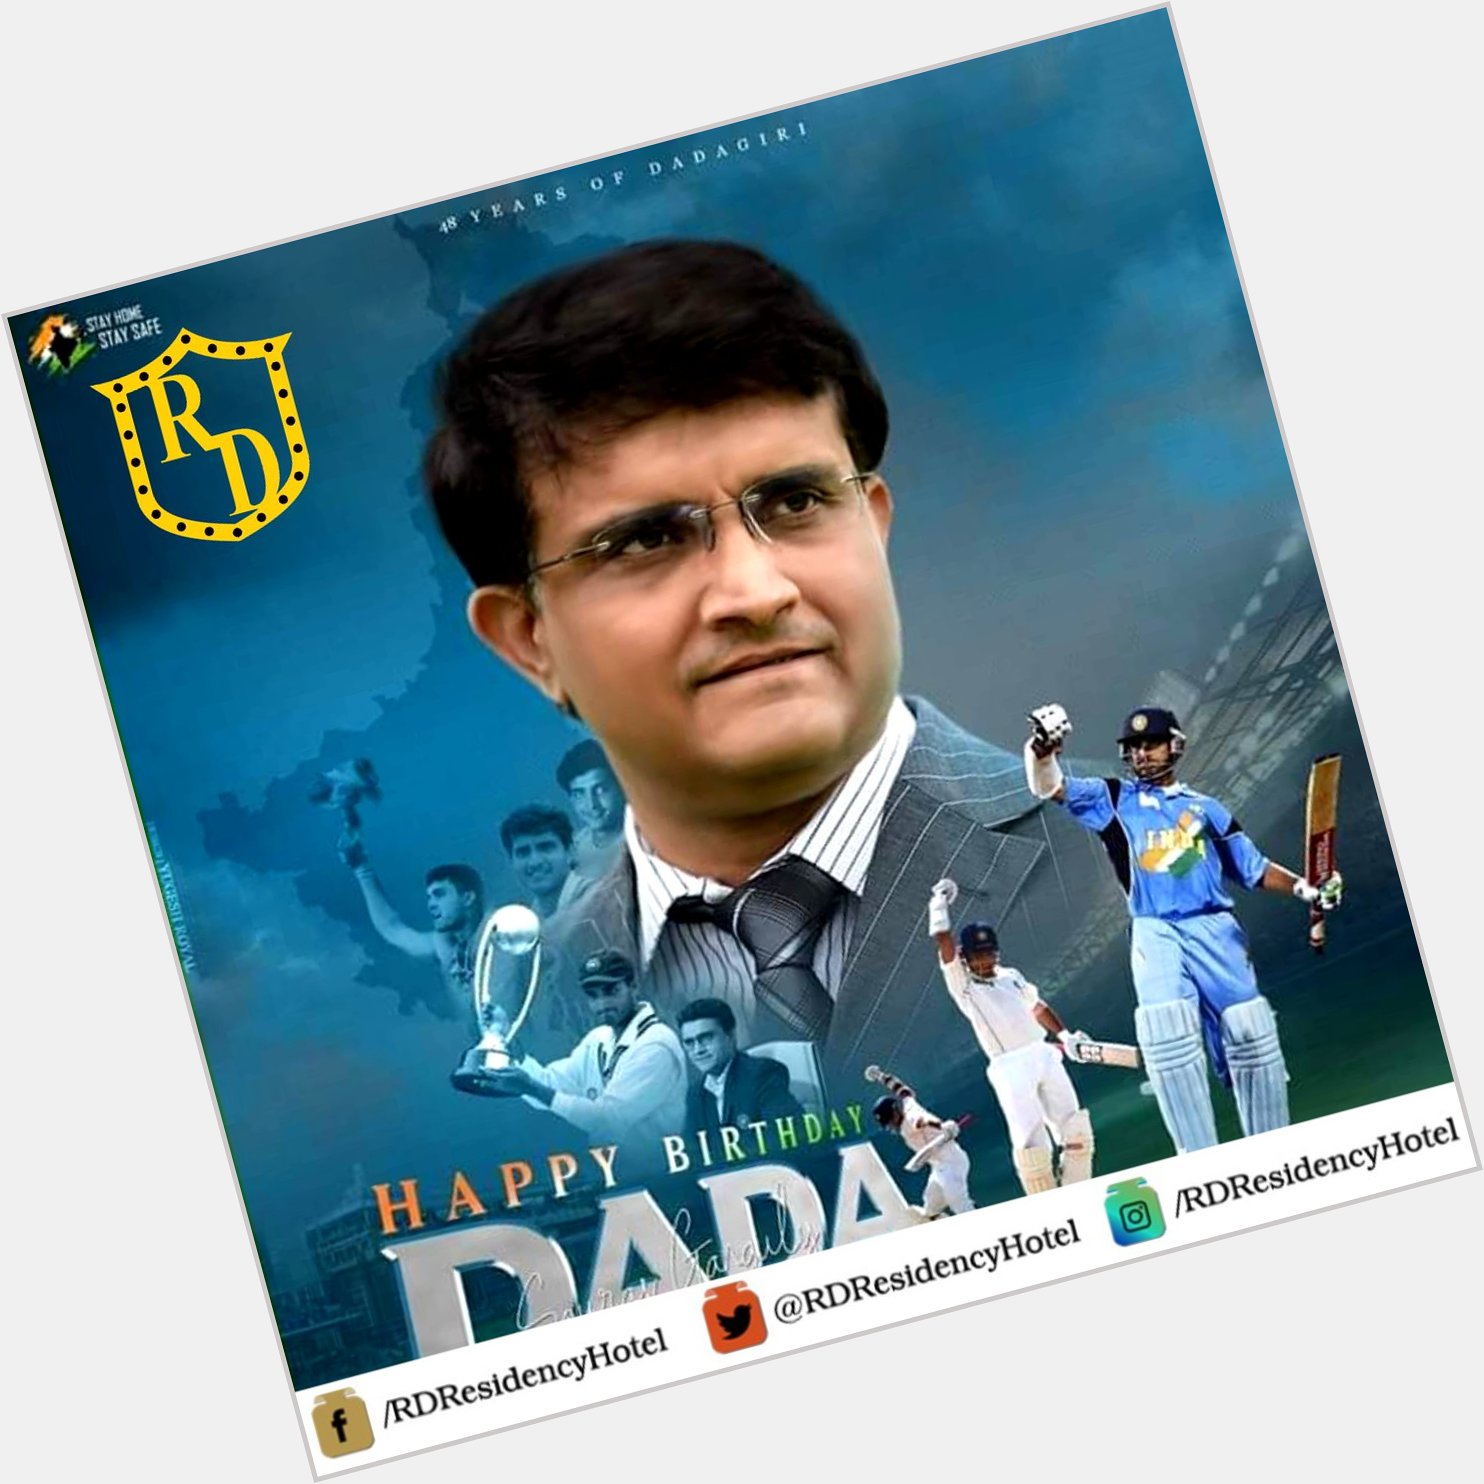   to the cricketer Saurav Ganguly.   